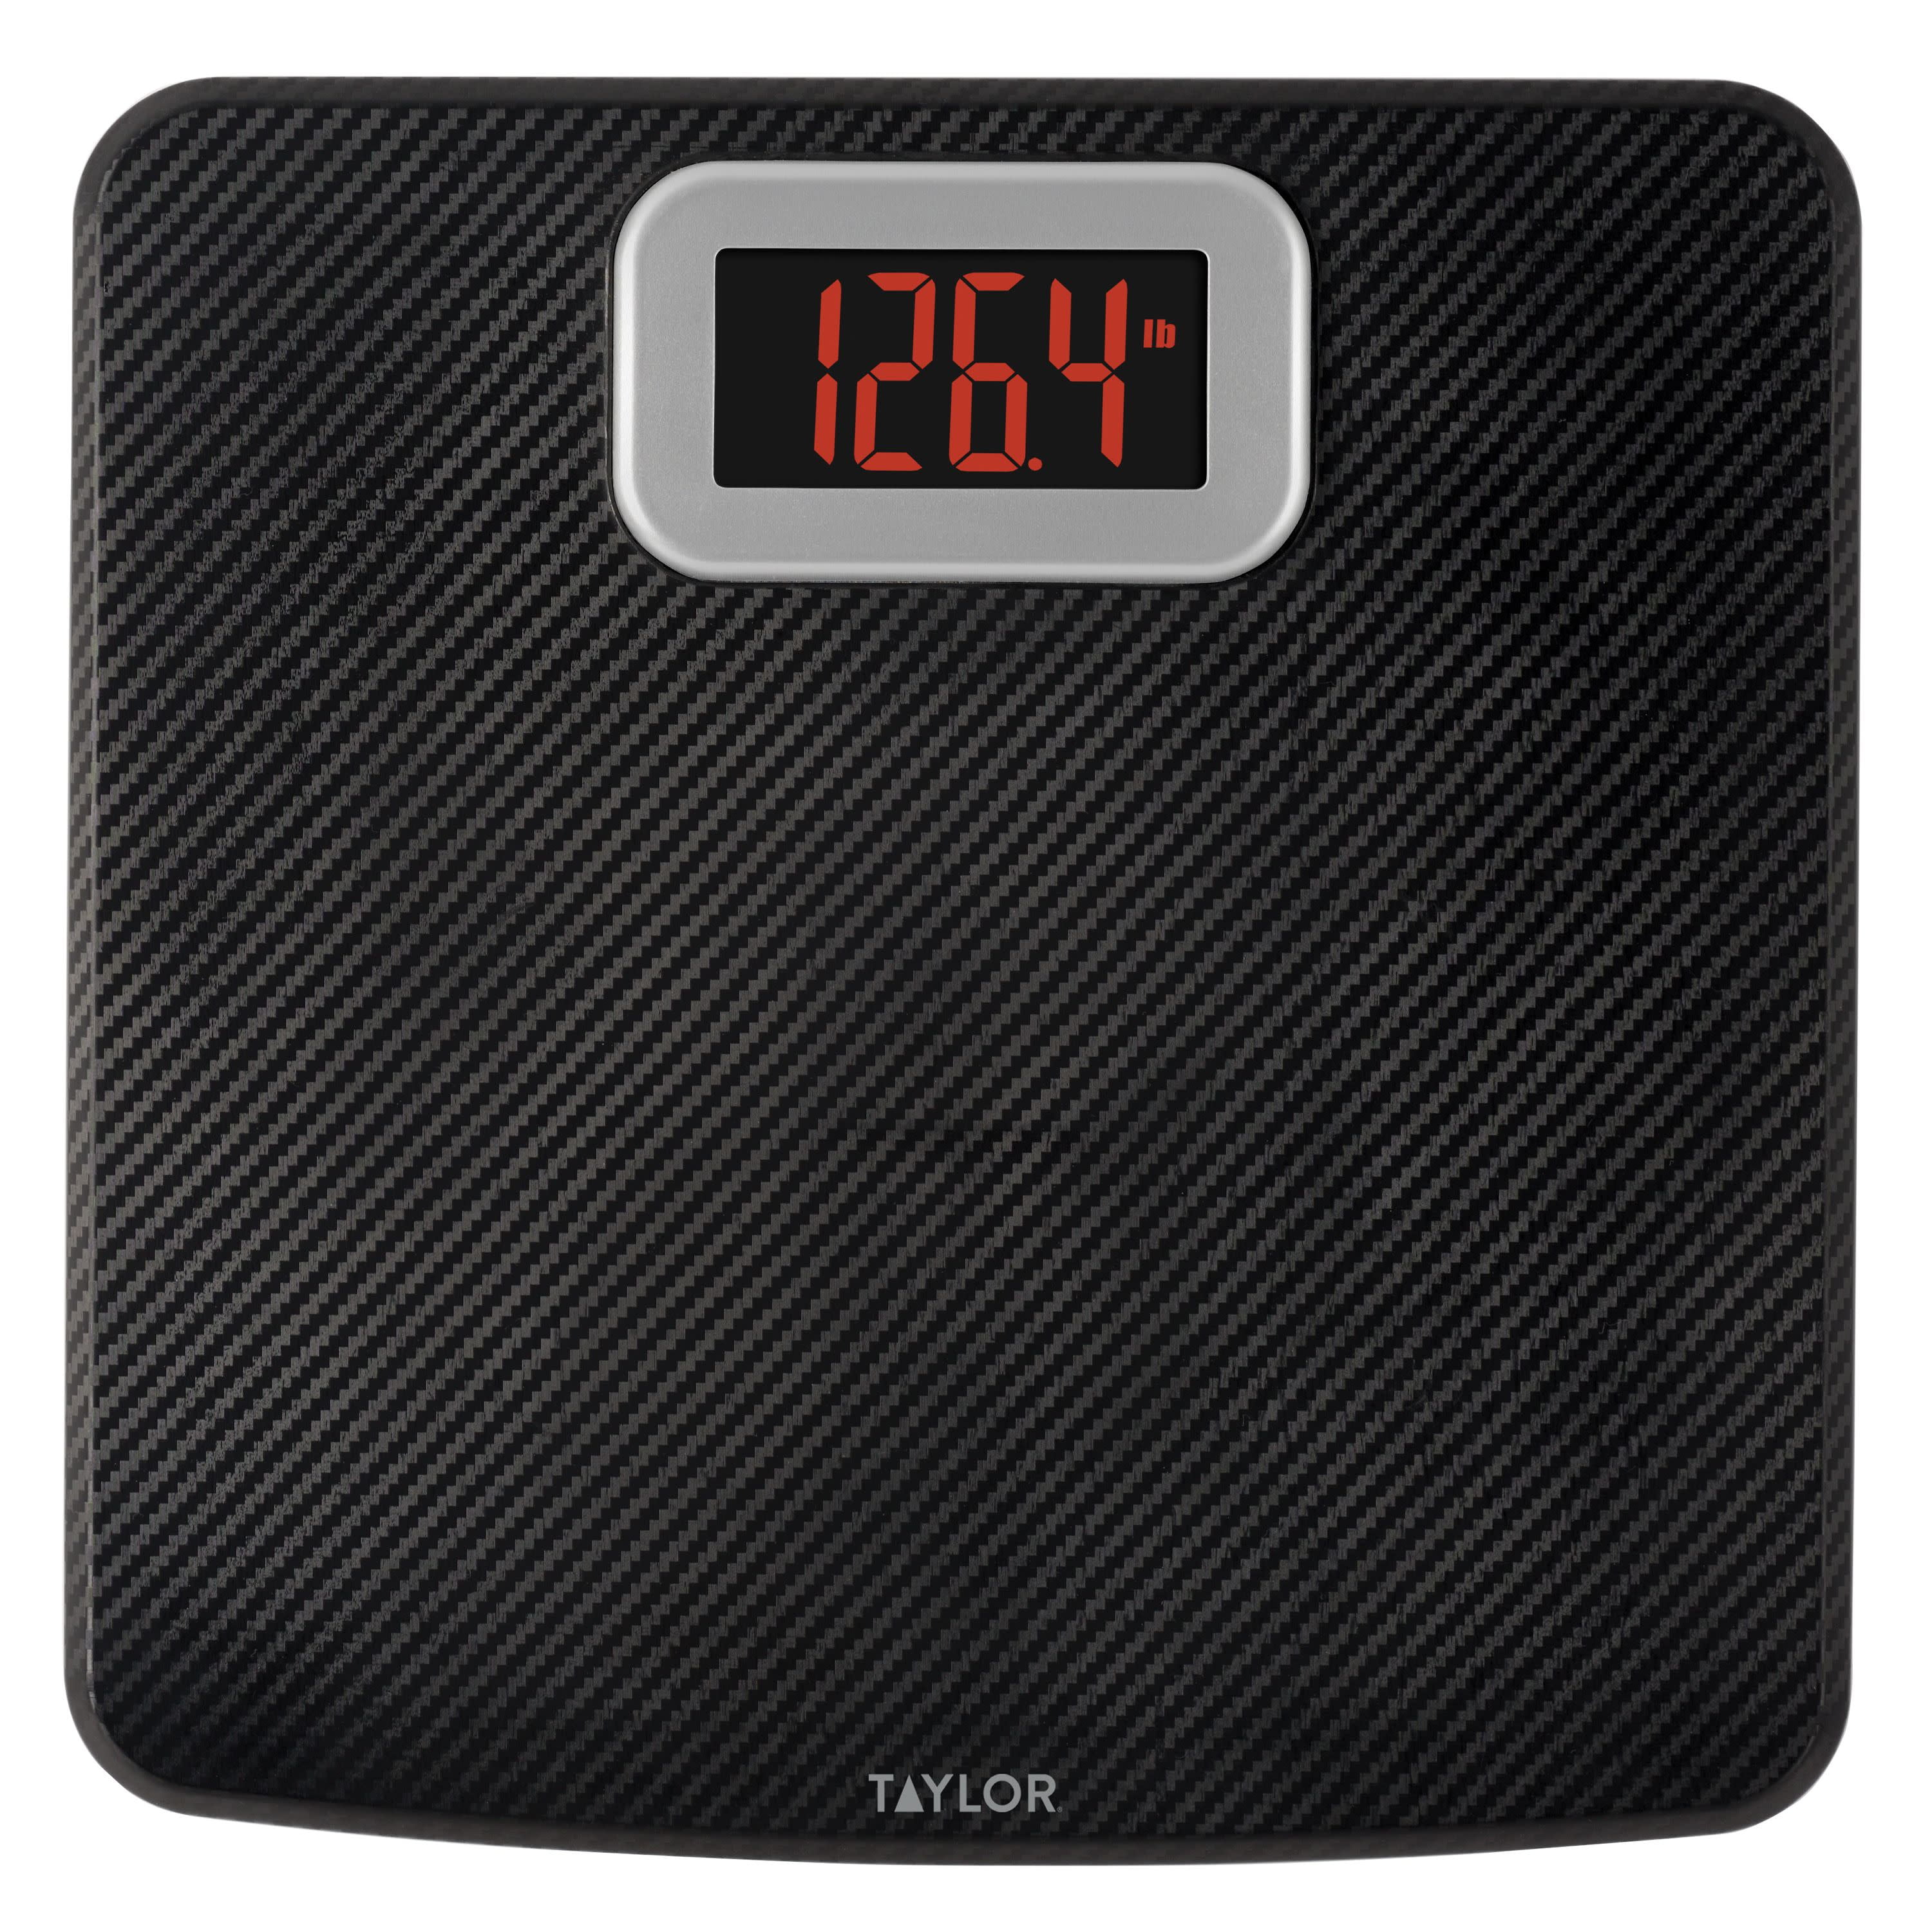 Taylor Digital Bathrooom Scales 75244192 with 440lb Capacity – Good's Store  Online